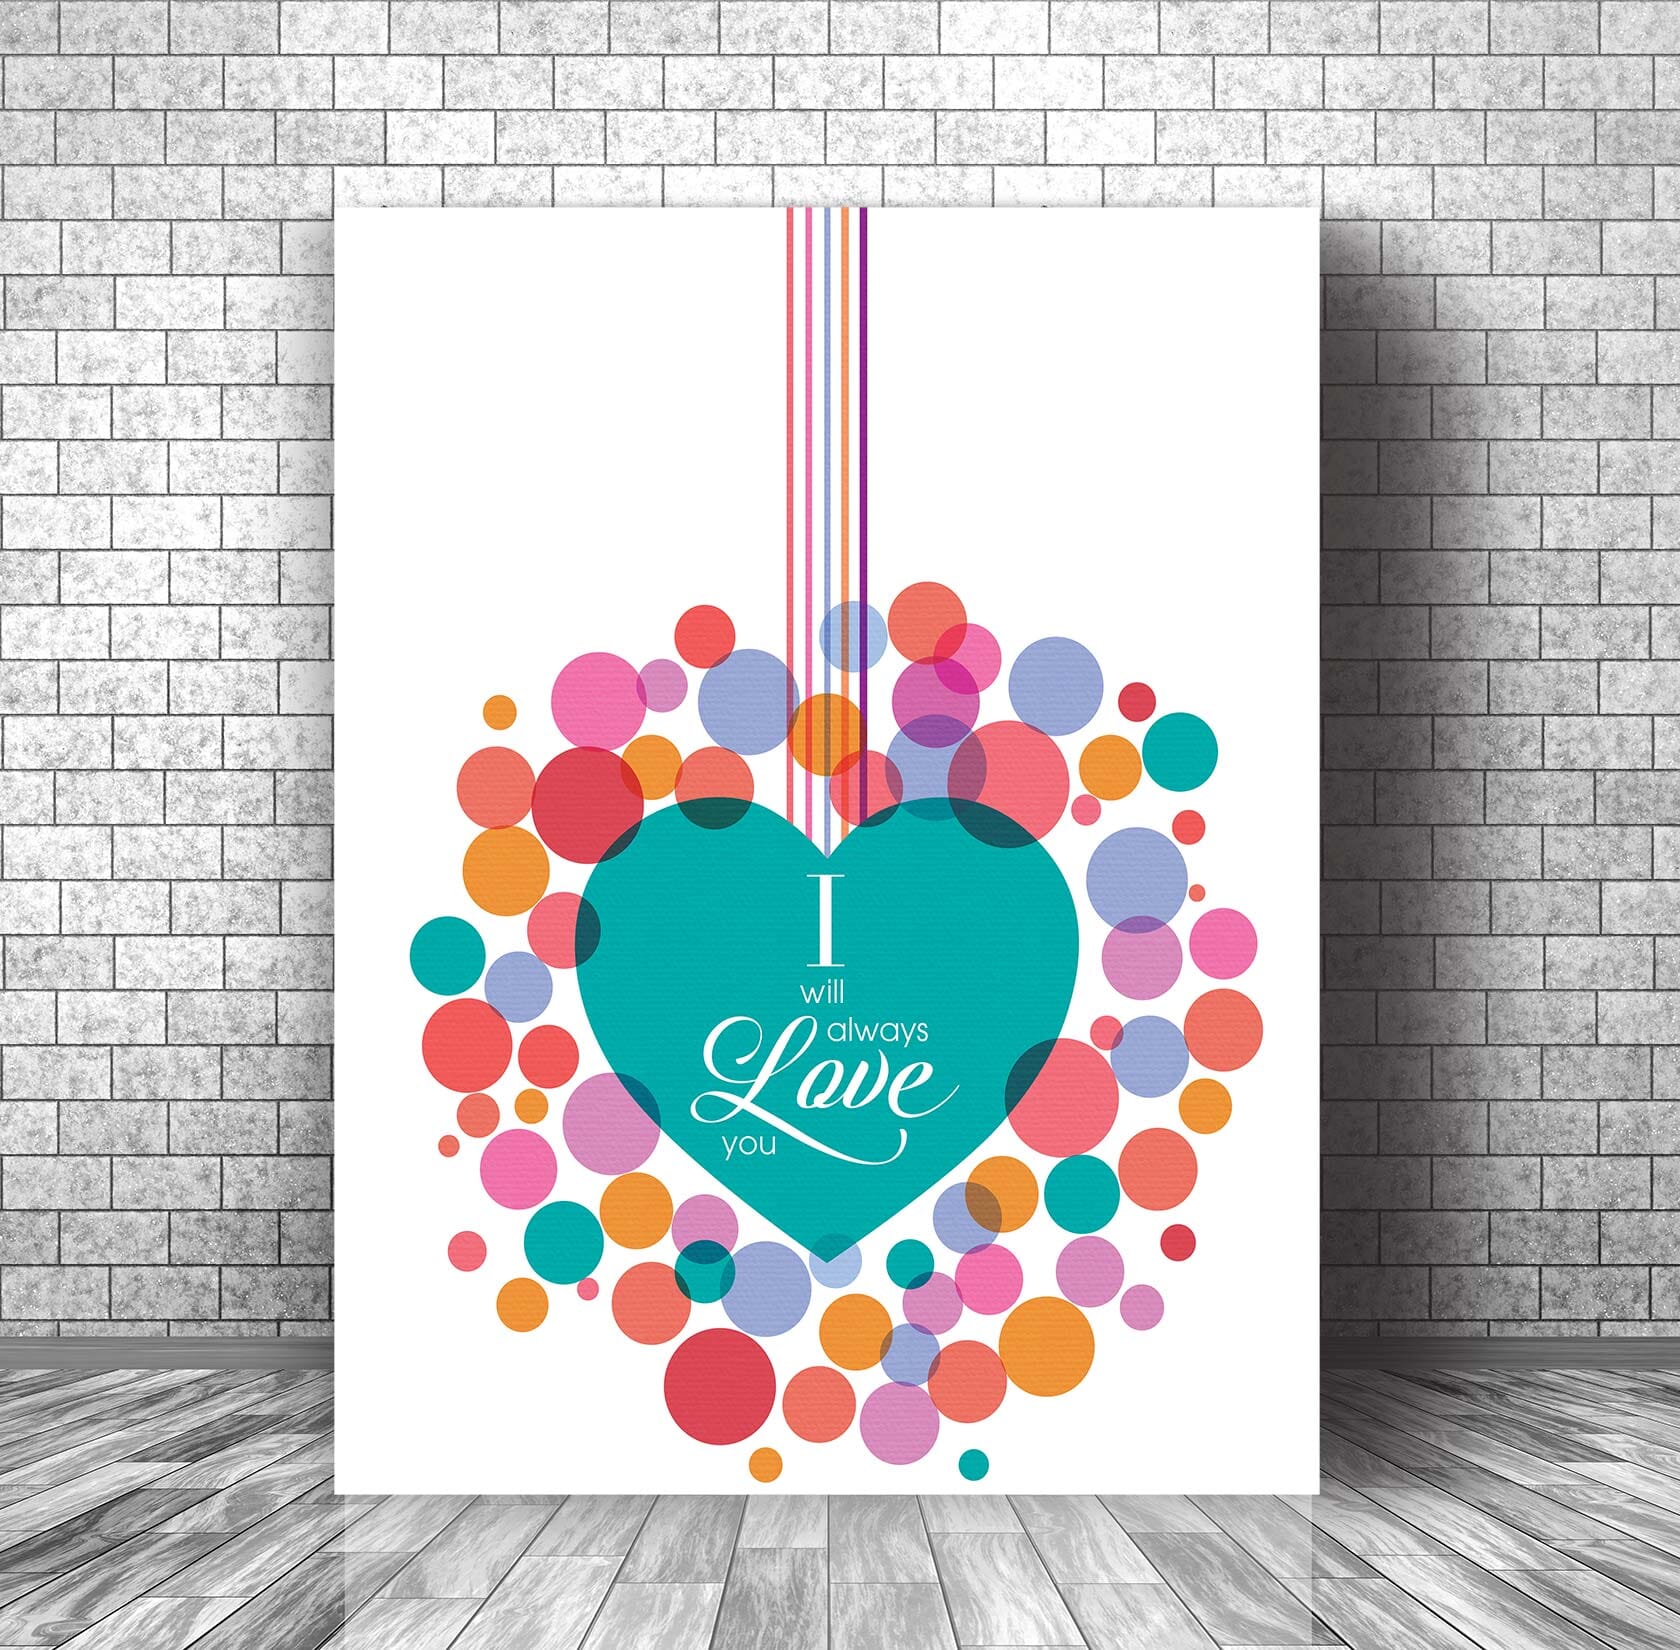 Love Song by The Cure - Wedding Song Lyric 80s Music Print Song Lyrics Art Song Lyrics Art 11x14 Canvas Wrap 